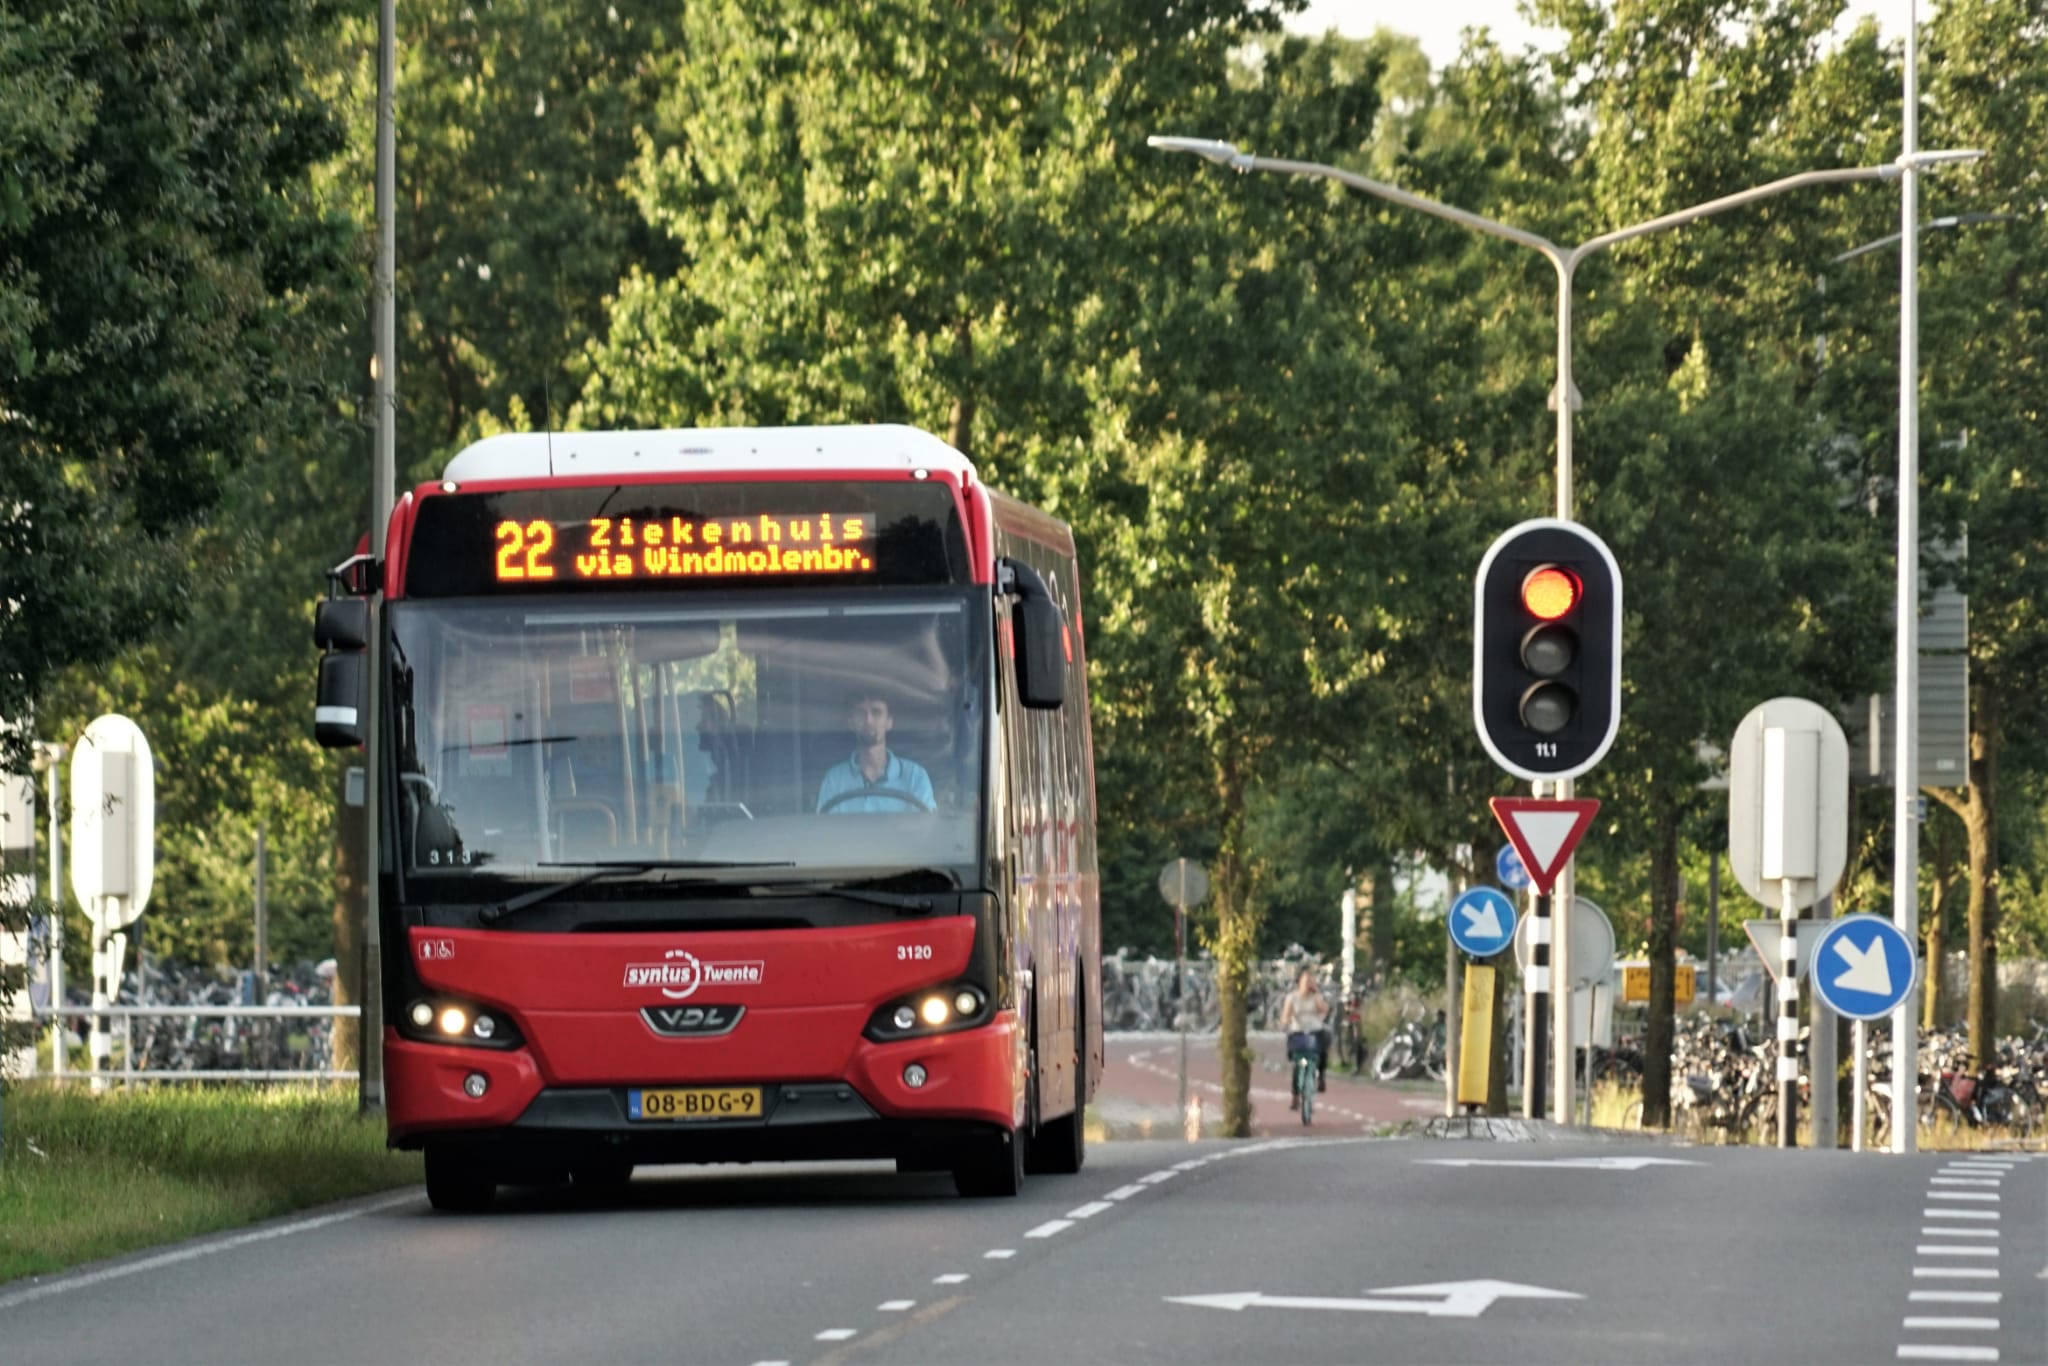 A red bus from the region of Twente is driving on a road.